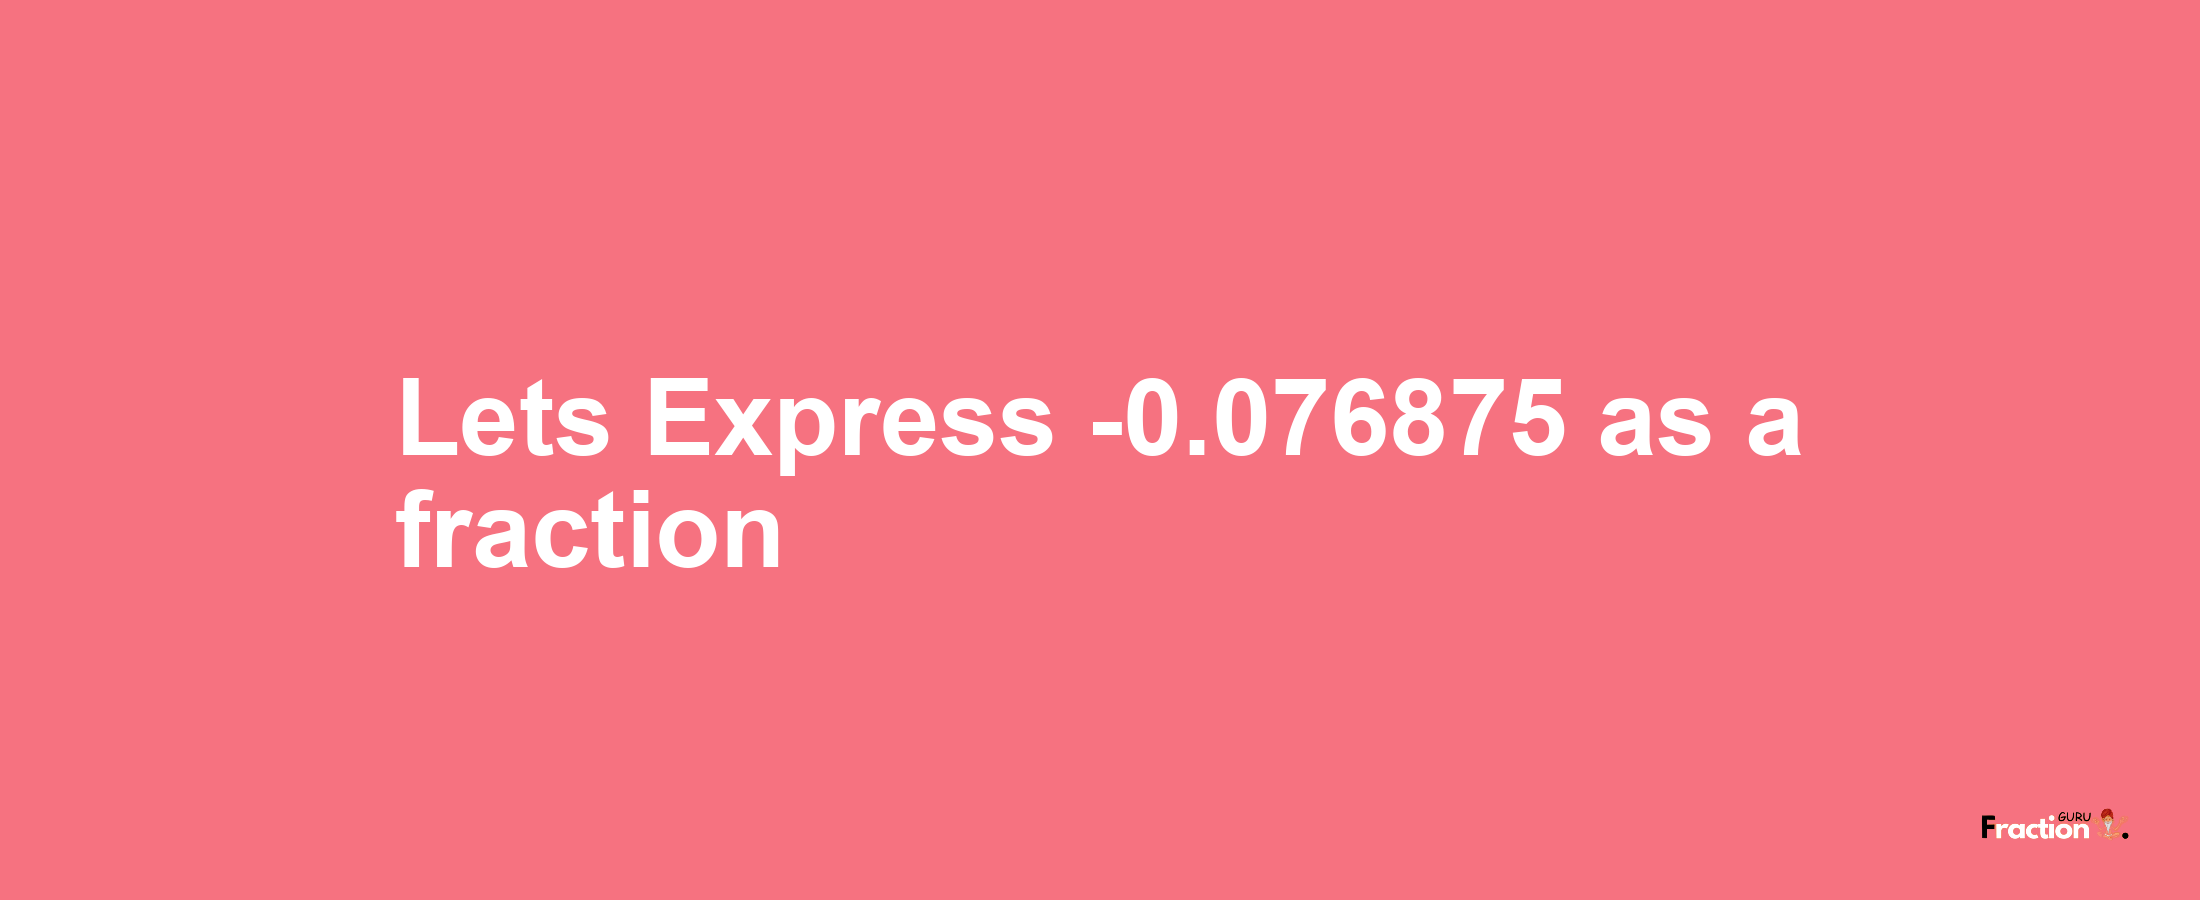 Lets Express -0.076875 as afraction